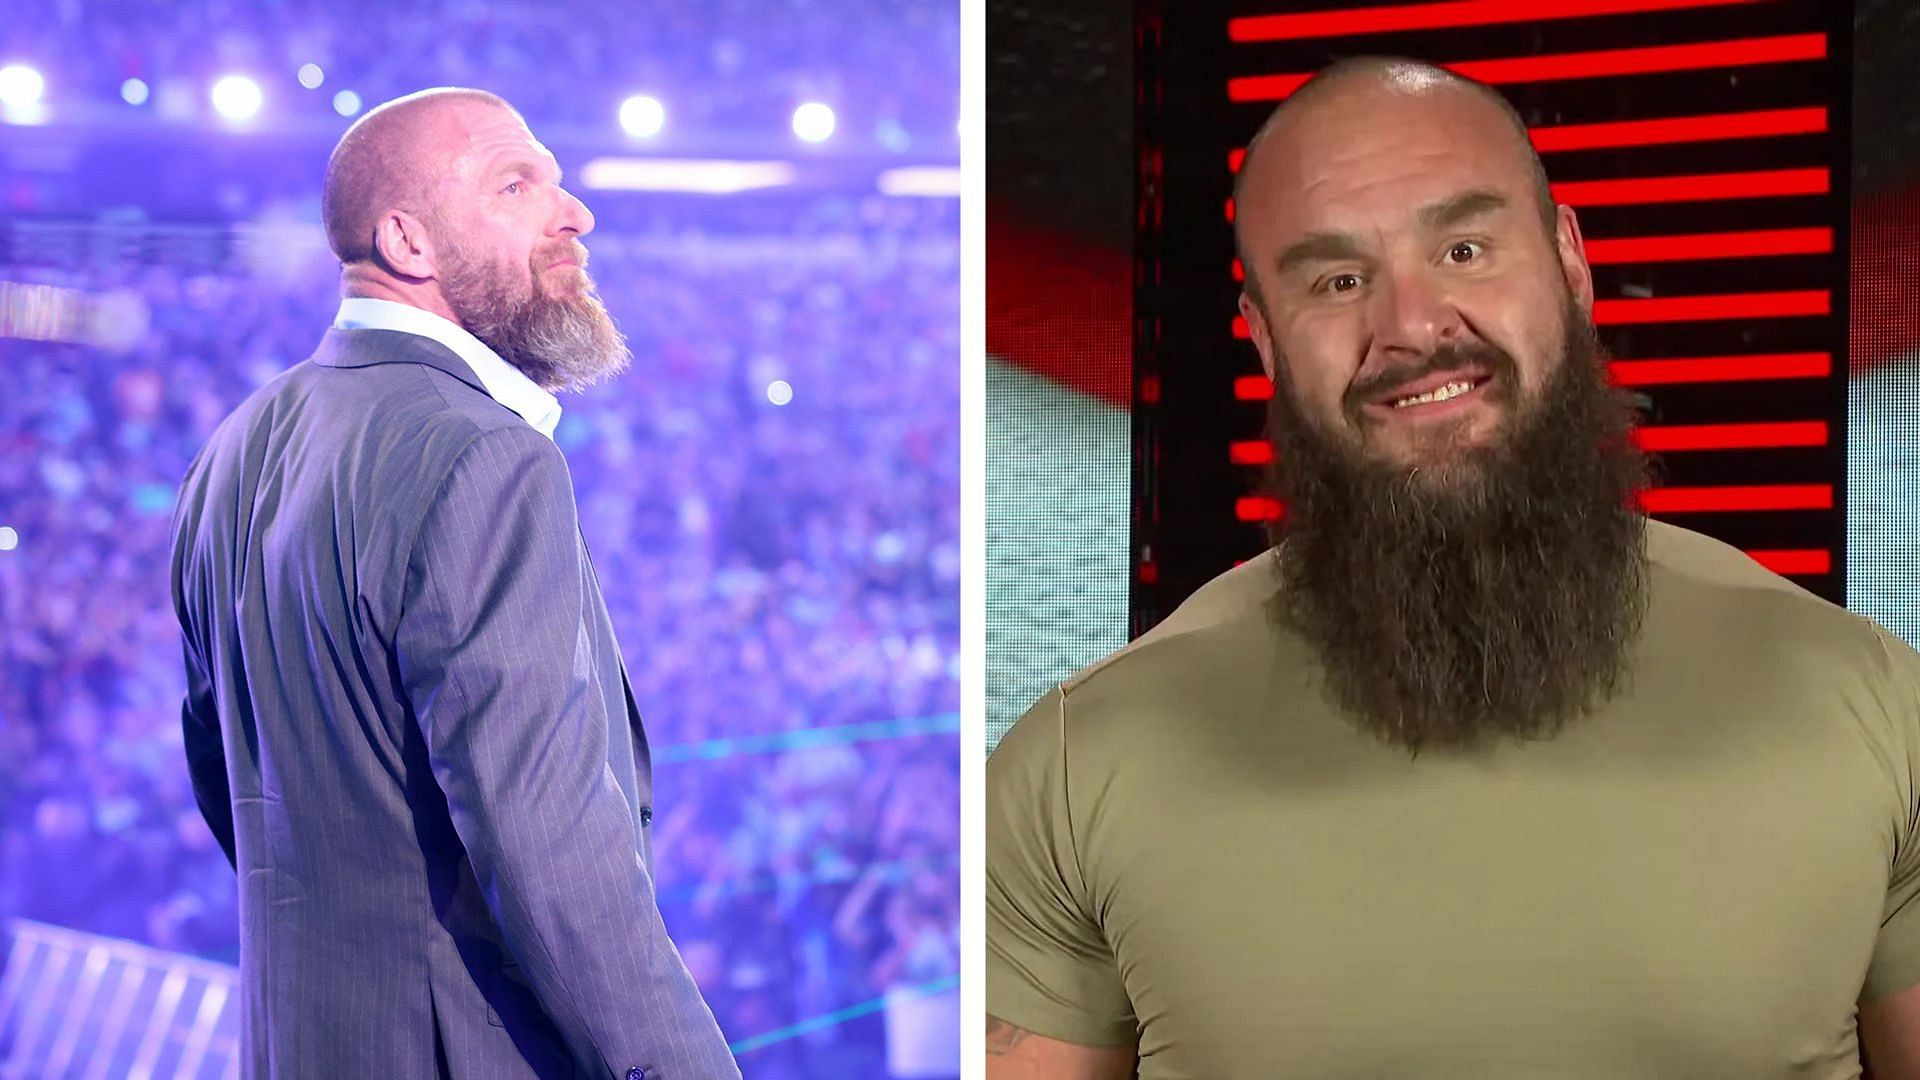 Braun Strowman could potentially return to WWE